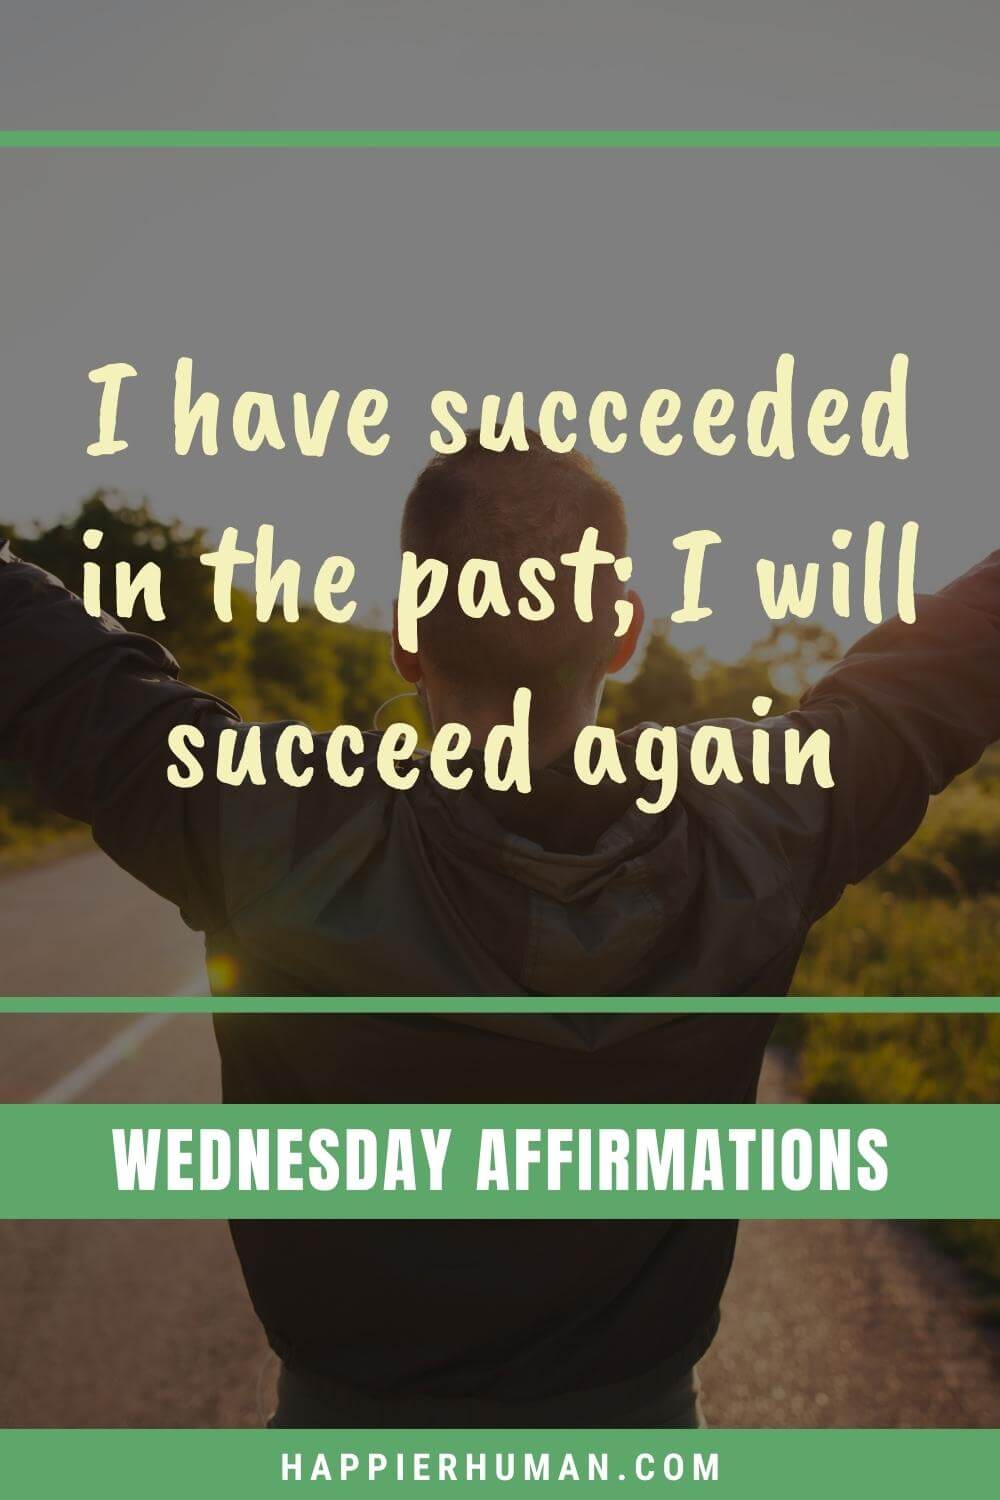 Wednesday Affirmations - I have succeeded in the past; I will succeed again | wednesday morning affirmations images | wednesday quotes | wednesday positive quotes